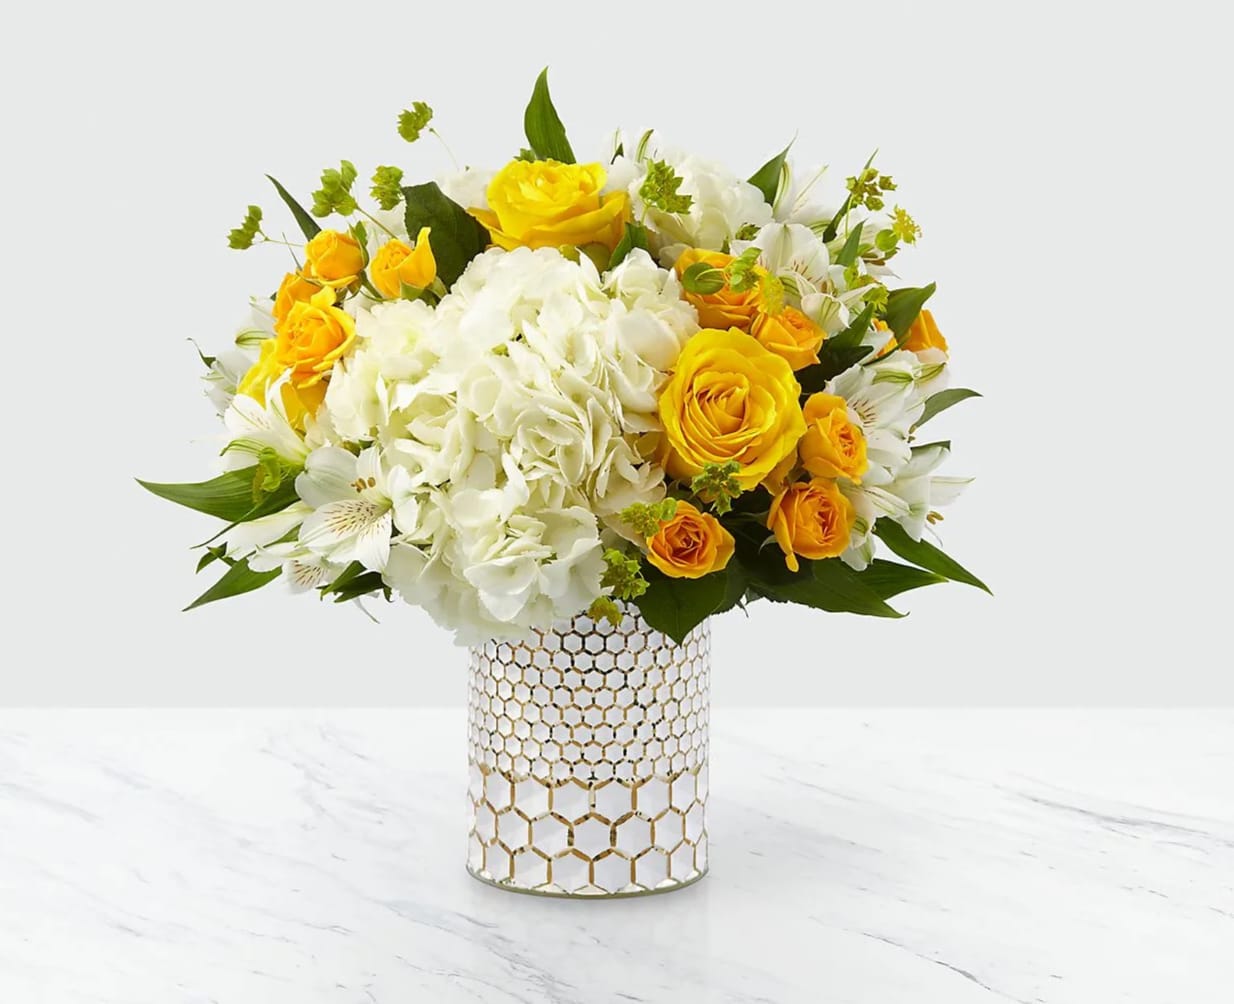 Bees Knees Bouquet - The perfect way to remind the most special people in your life that they're the bee's knees! This bouquet is sweet as can be with a combination of yellow roses and white hydrangea blooms, set nicely in a metallic honeycomb vase. Even better, this gorgeous pick comes right from a local florist!  DETAILS Regular bouquet is approximately 13&quot;H x 12&quot;W Deluxe bouquet is approximately 14&quot;H x 13&quot;W Premium bouquet is approximately 15&quot;H x 14&quot;W  STEMS Hydrangea Rose